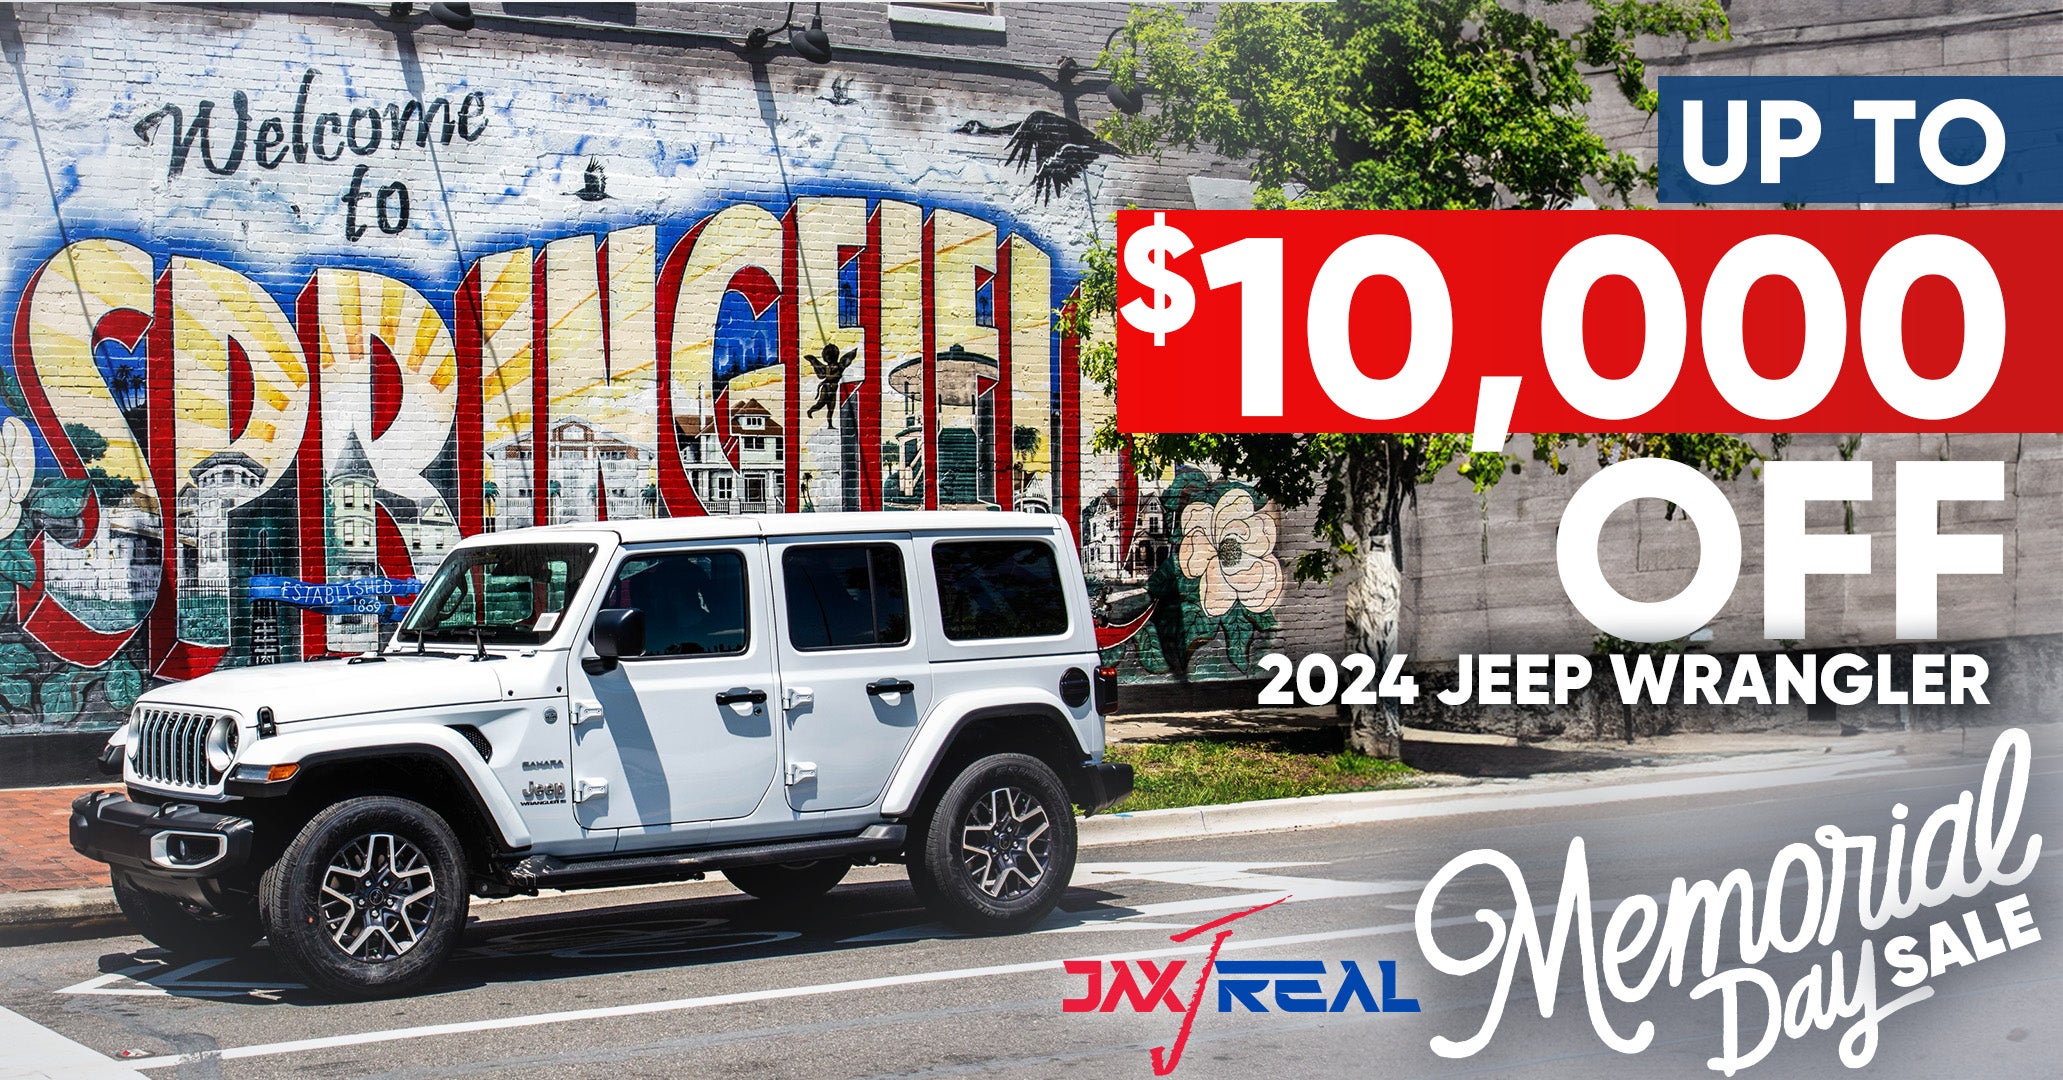 Up to $10,000 Off 2024 Jeep Wrangler